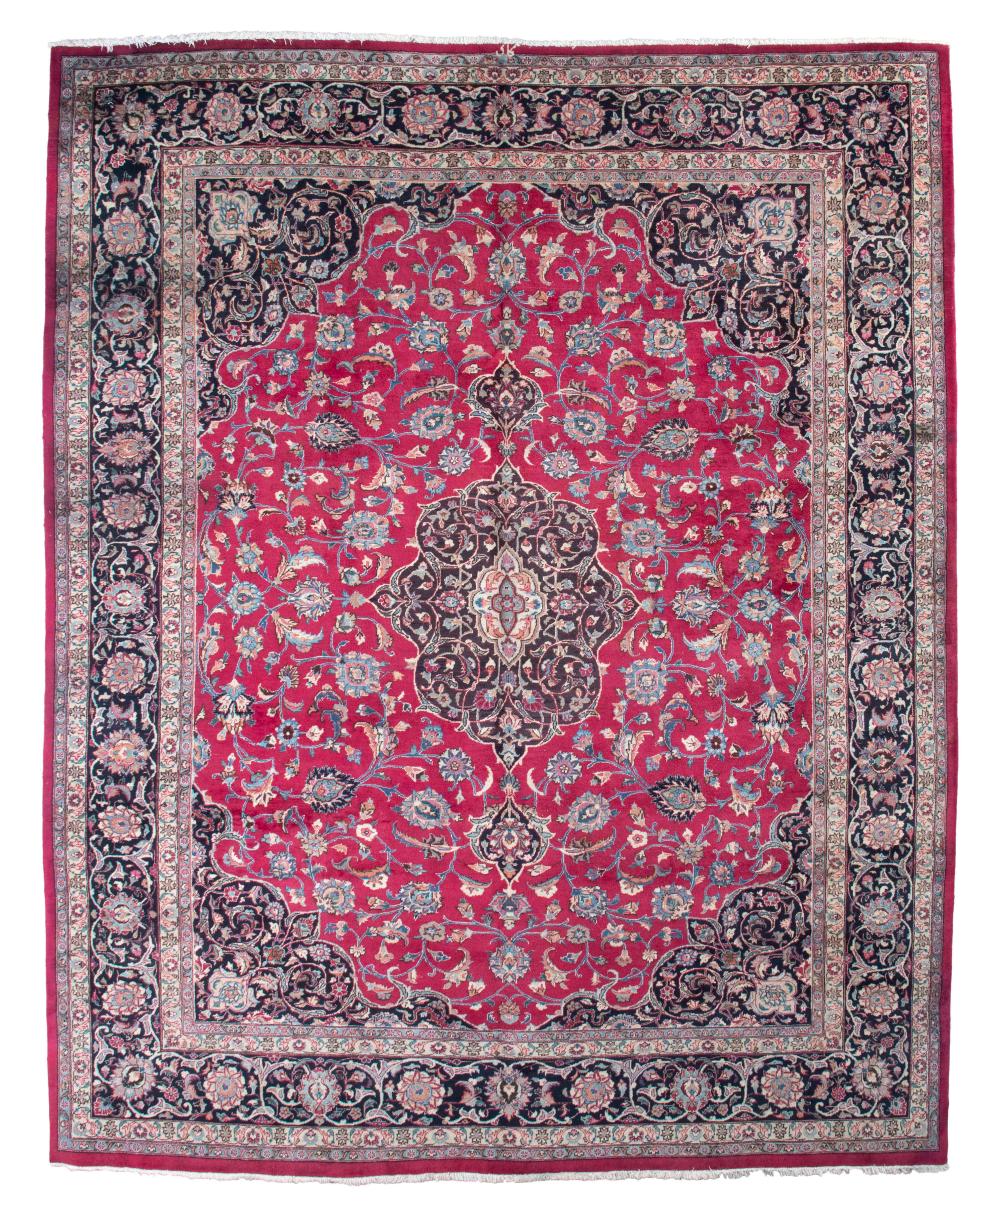 MESHED RUG 10 0 X 12 4  35093d